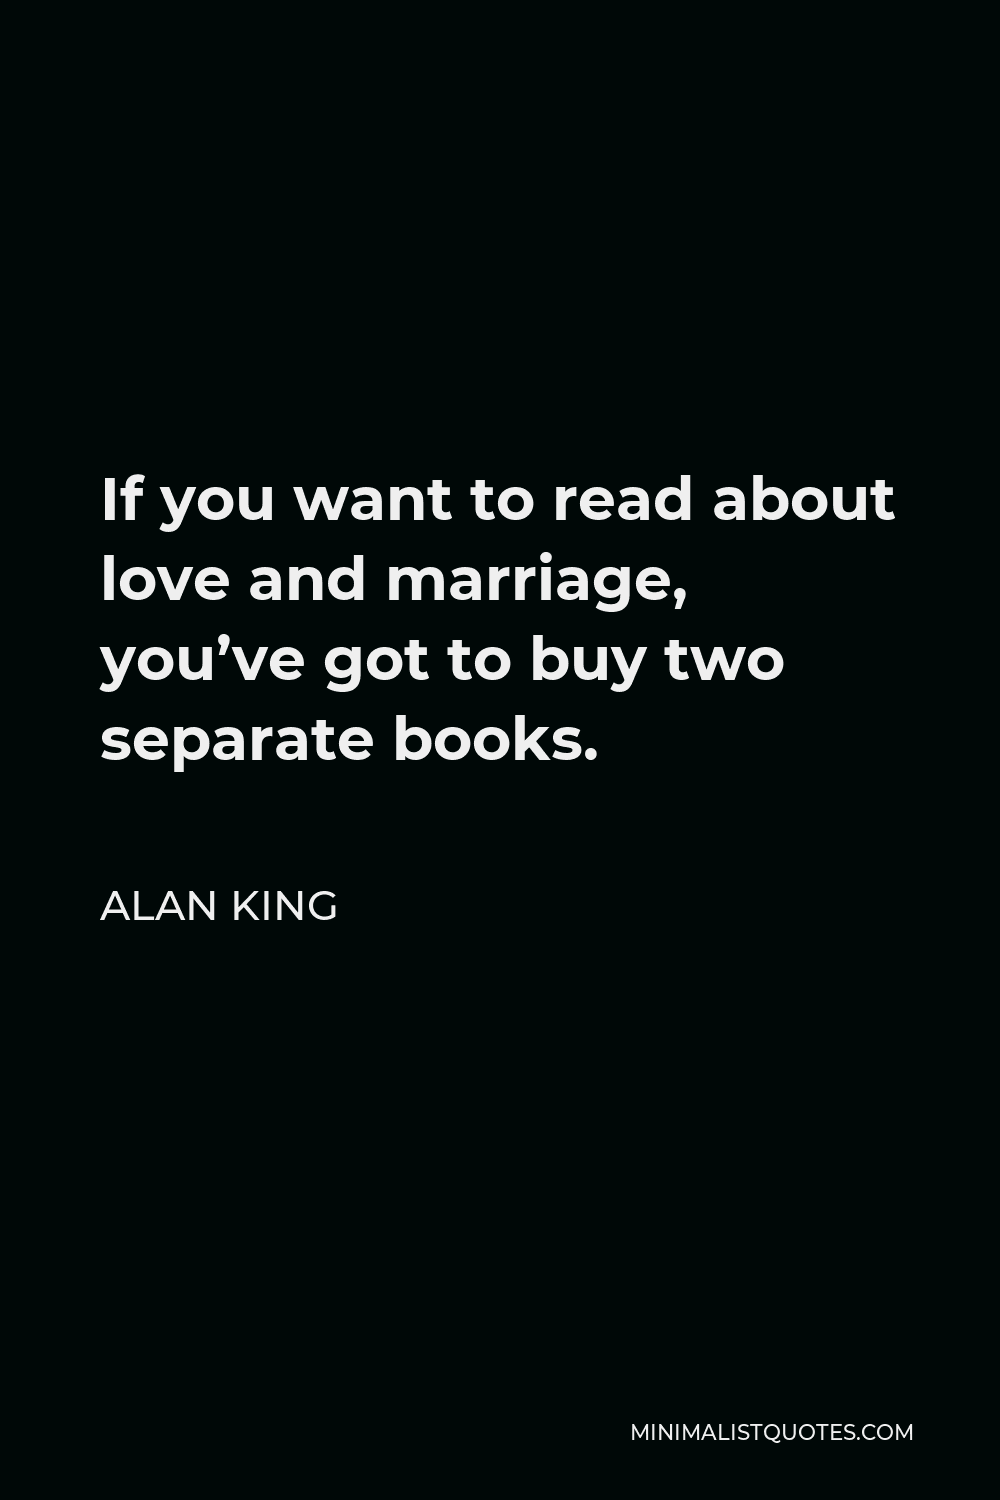 Alan King Quote - If you want to read about love and marriage, you’ve got to buy two separate books.